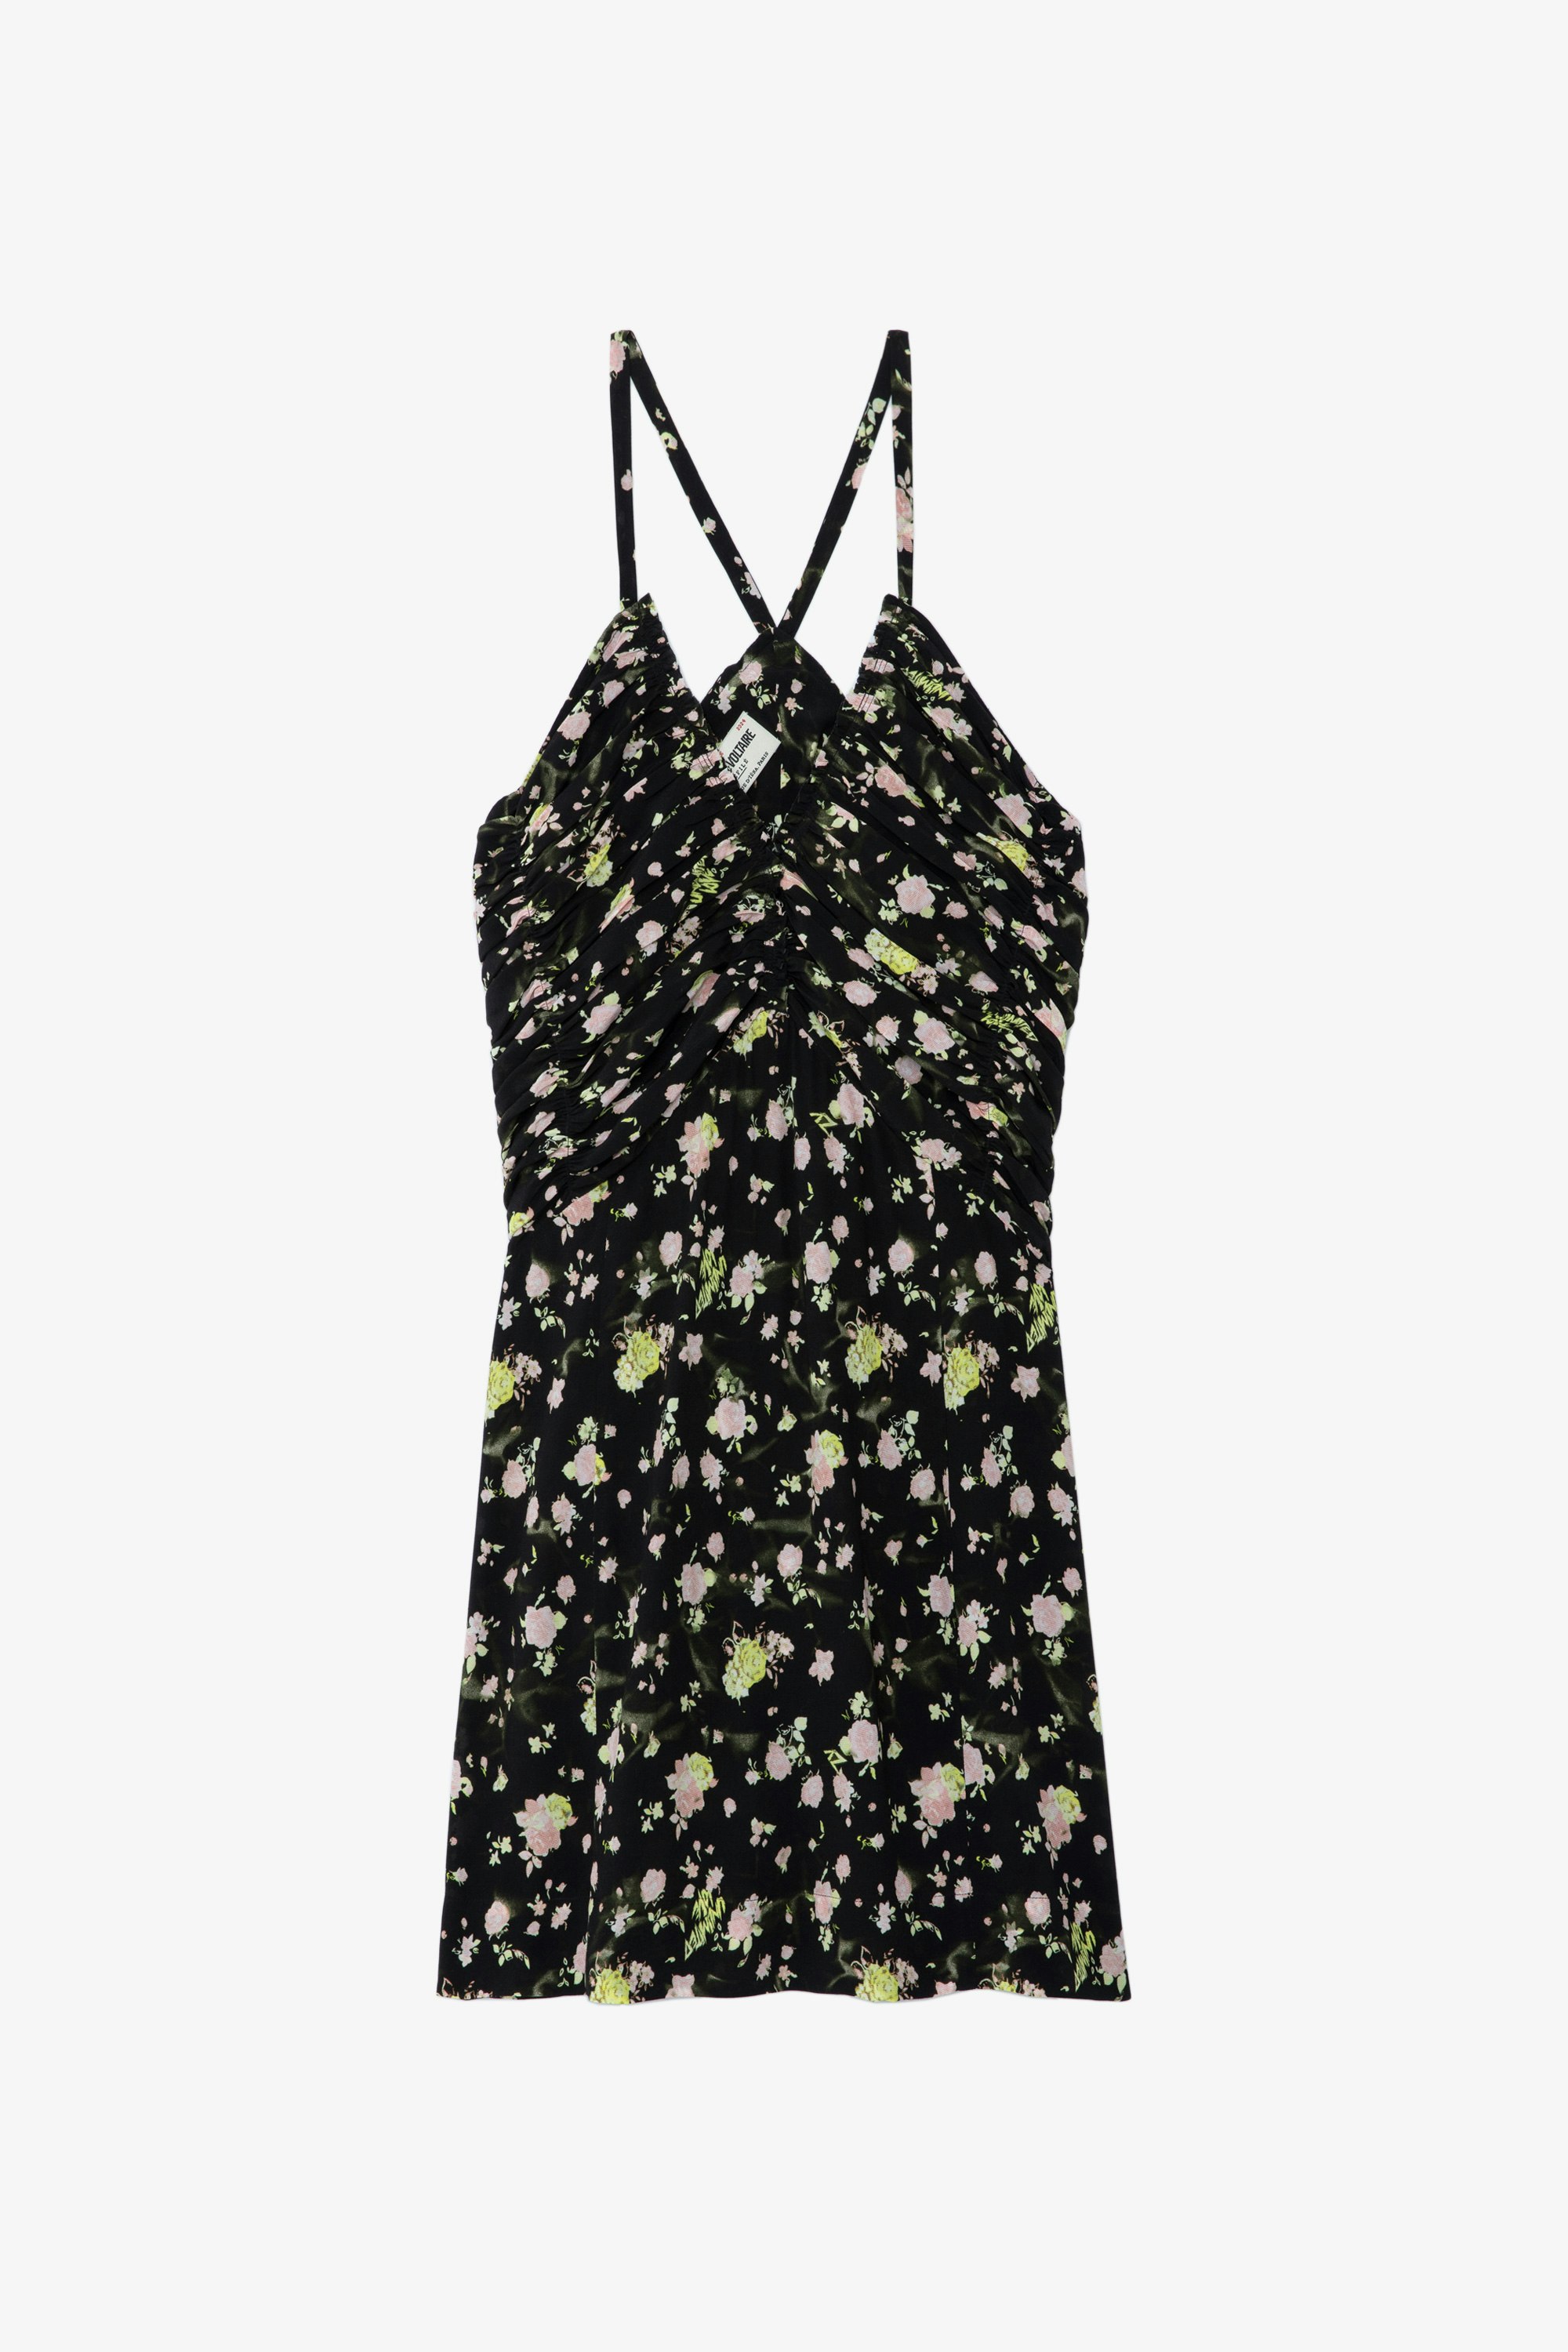 Randa Soft Crinkle Roses Dress - Women's black floral-print silk mini dress with rouched details.